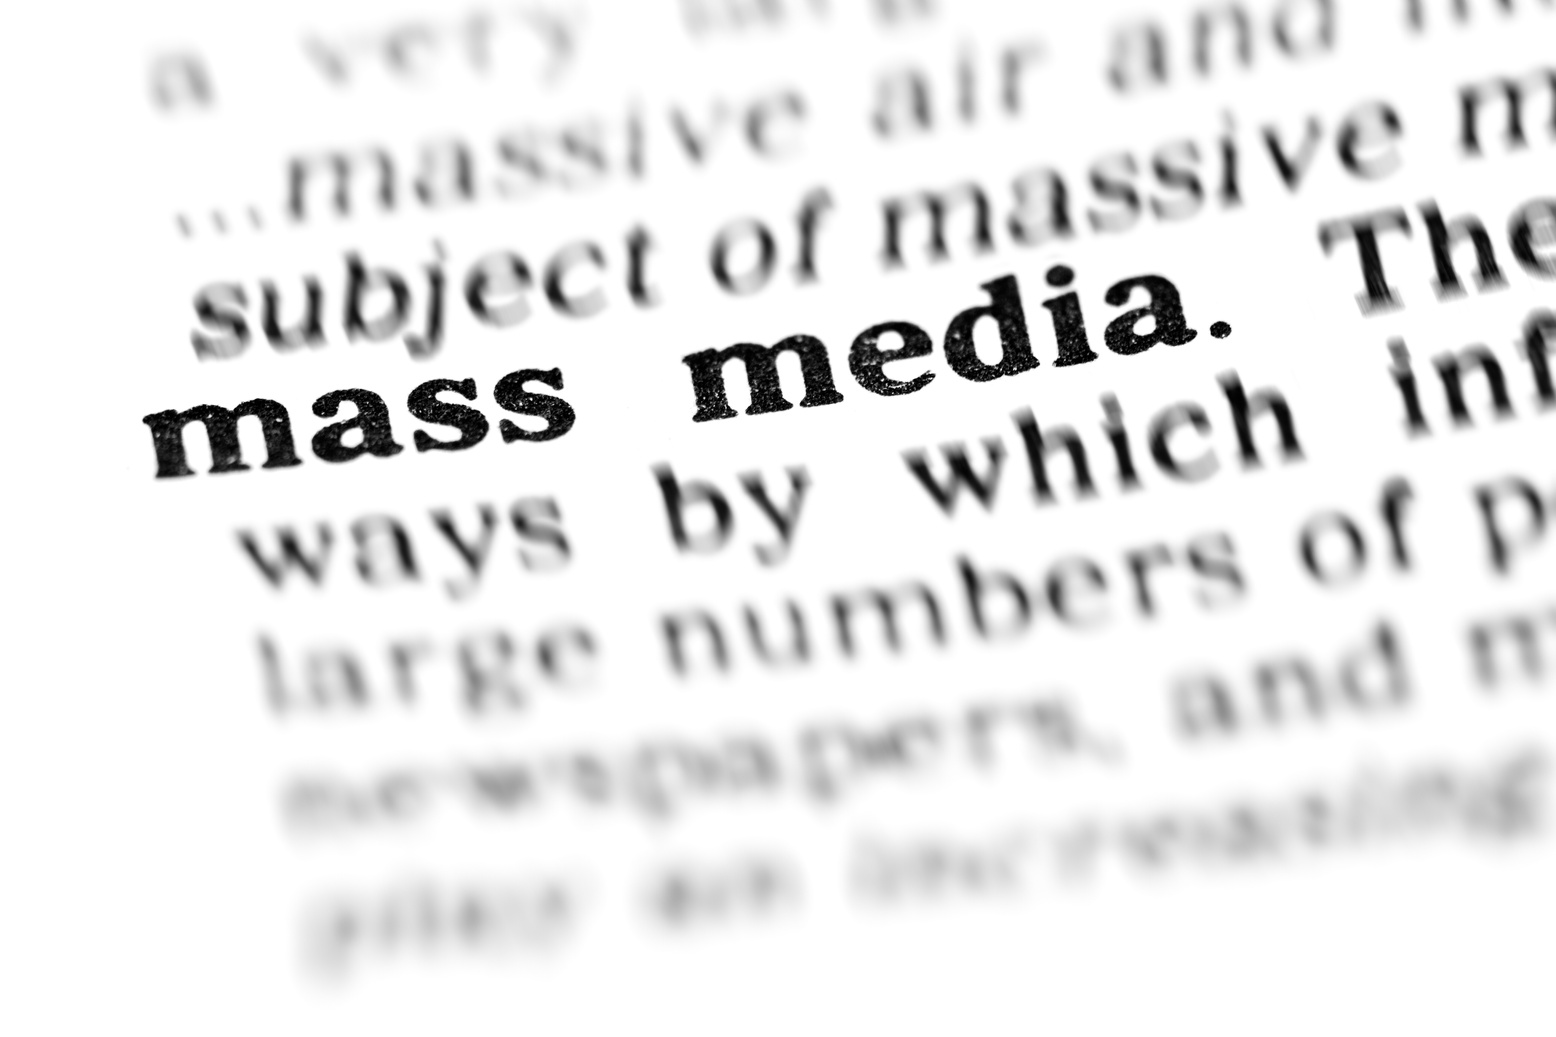 mass media (the dictionary project)